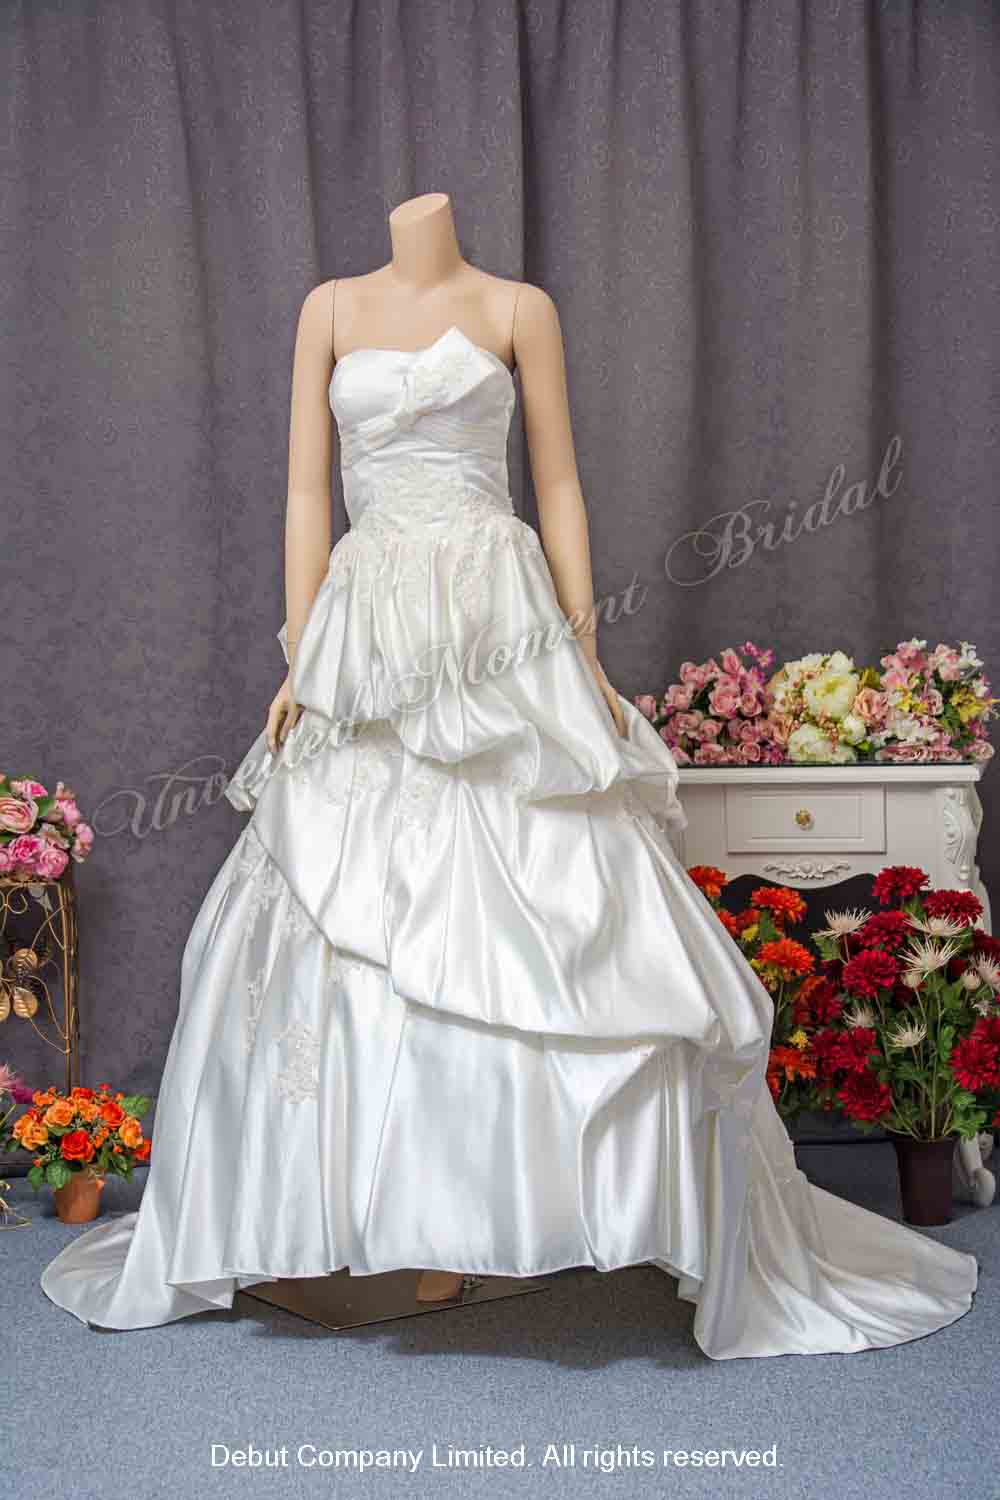 Bride in strapless, lightly-beaded, satin wedding gown with an accentuated bow on front bodice, and a brush-train 無肩帶, 閃片釘珠, 蝴蝶結, 褶叠裙擺緞料婚紗